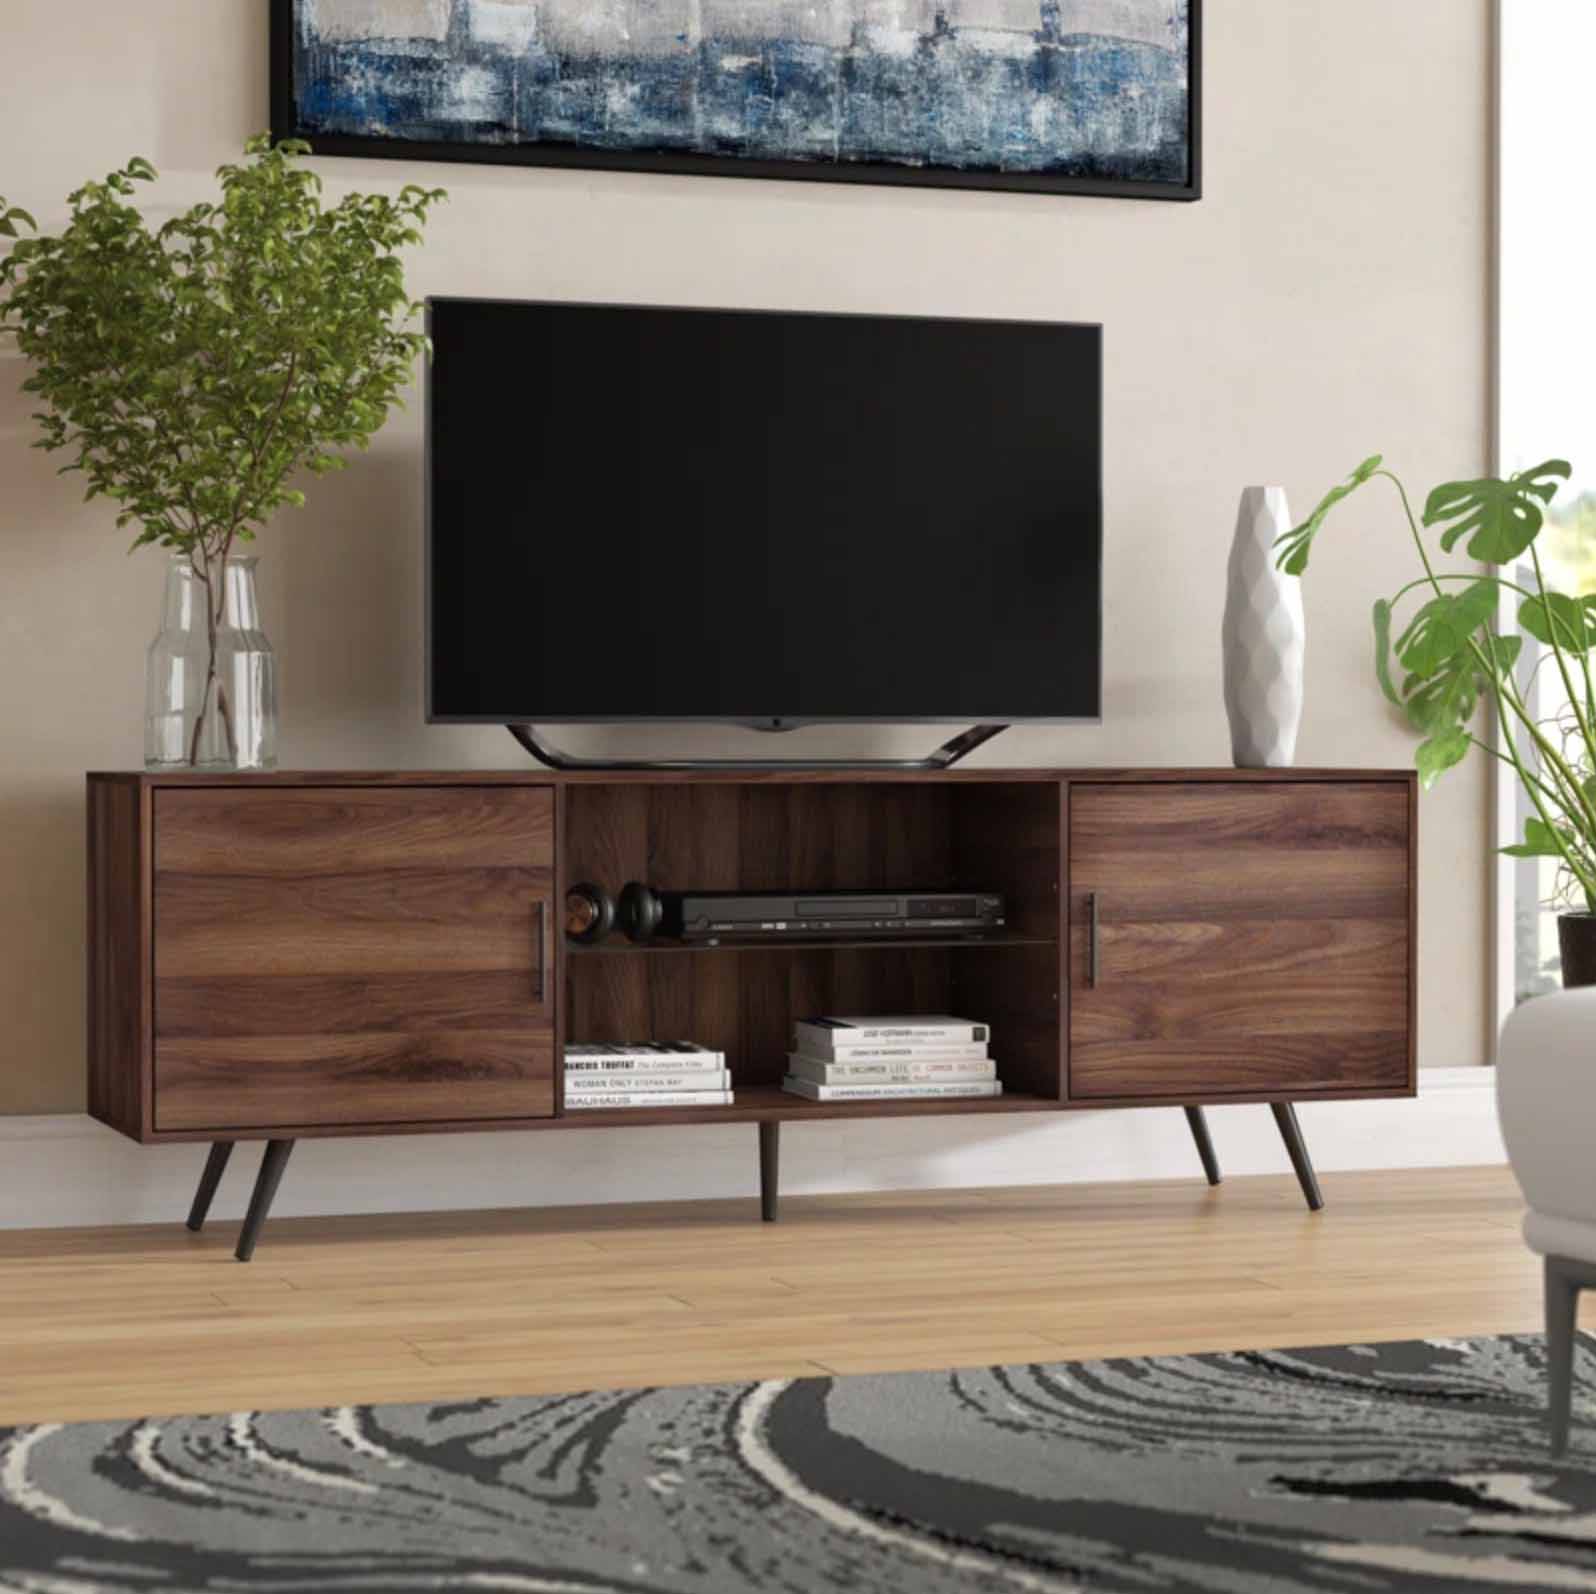 Wooden TV stand in living room setting